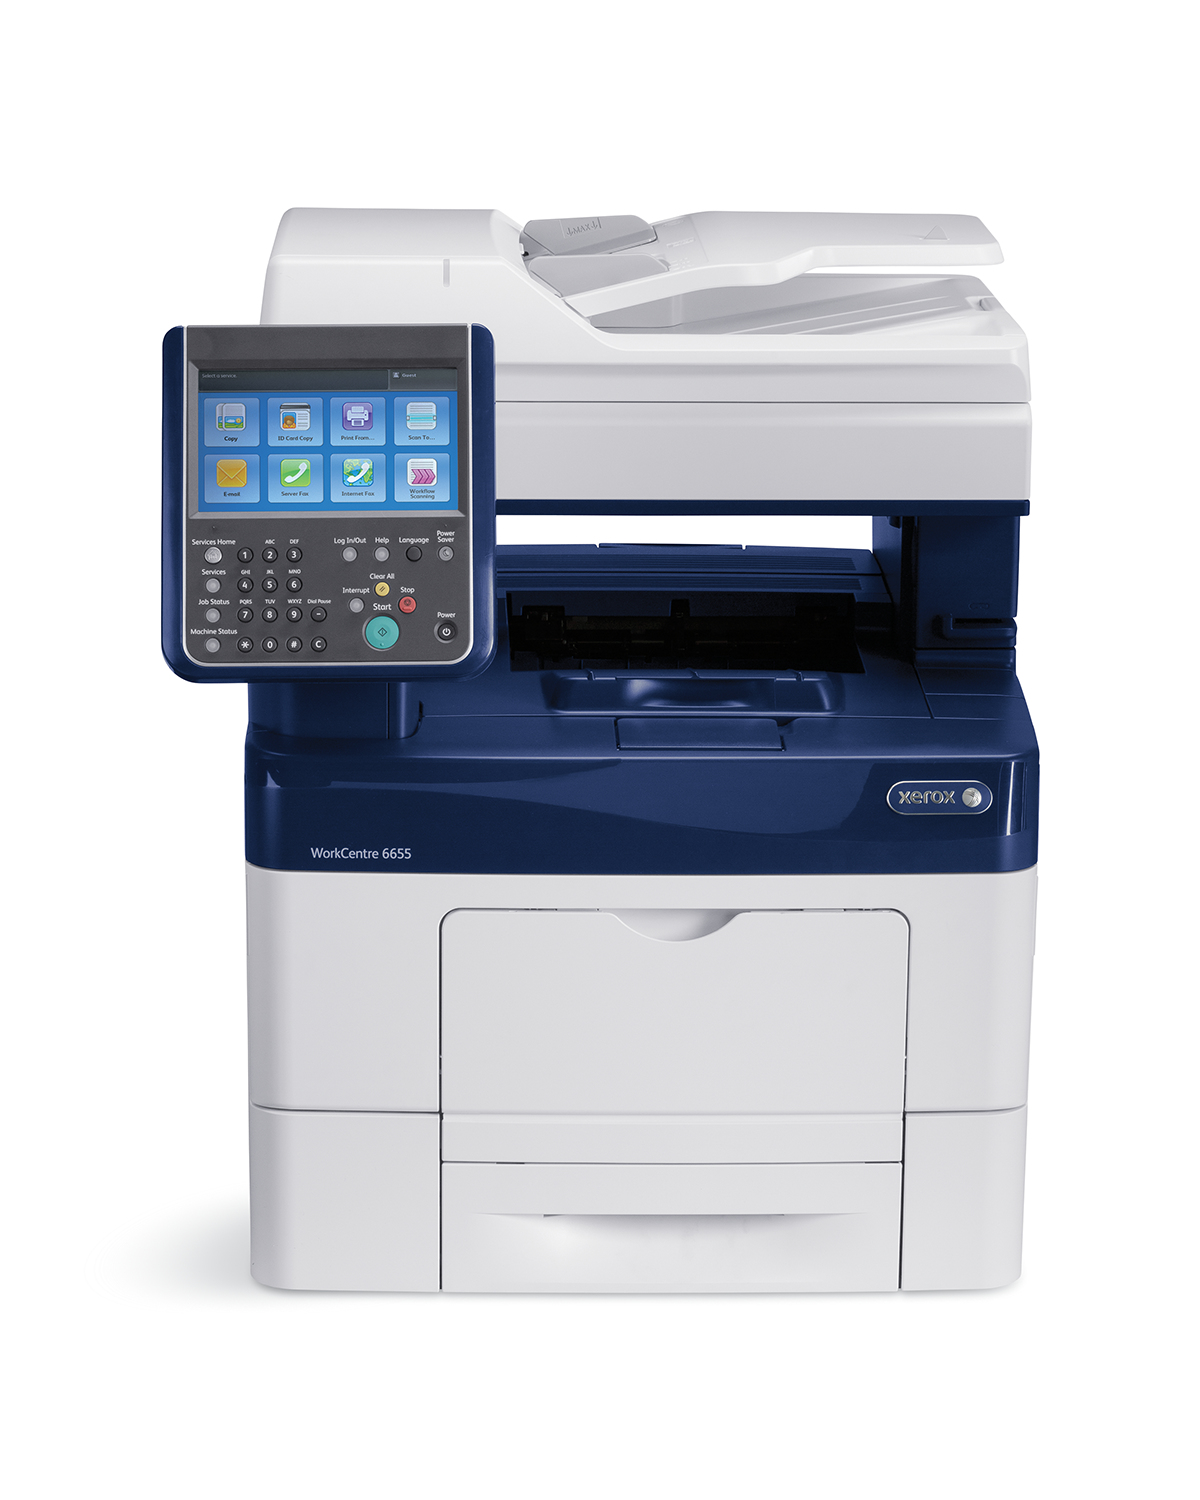 Xerox Workcentre 6655v X A4 35 35ppm Duplex Copy Print Scan Fax Sold Adobe Ps3 Pcl5 6 2 Trays Total 700 Sheets